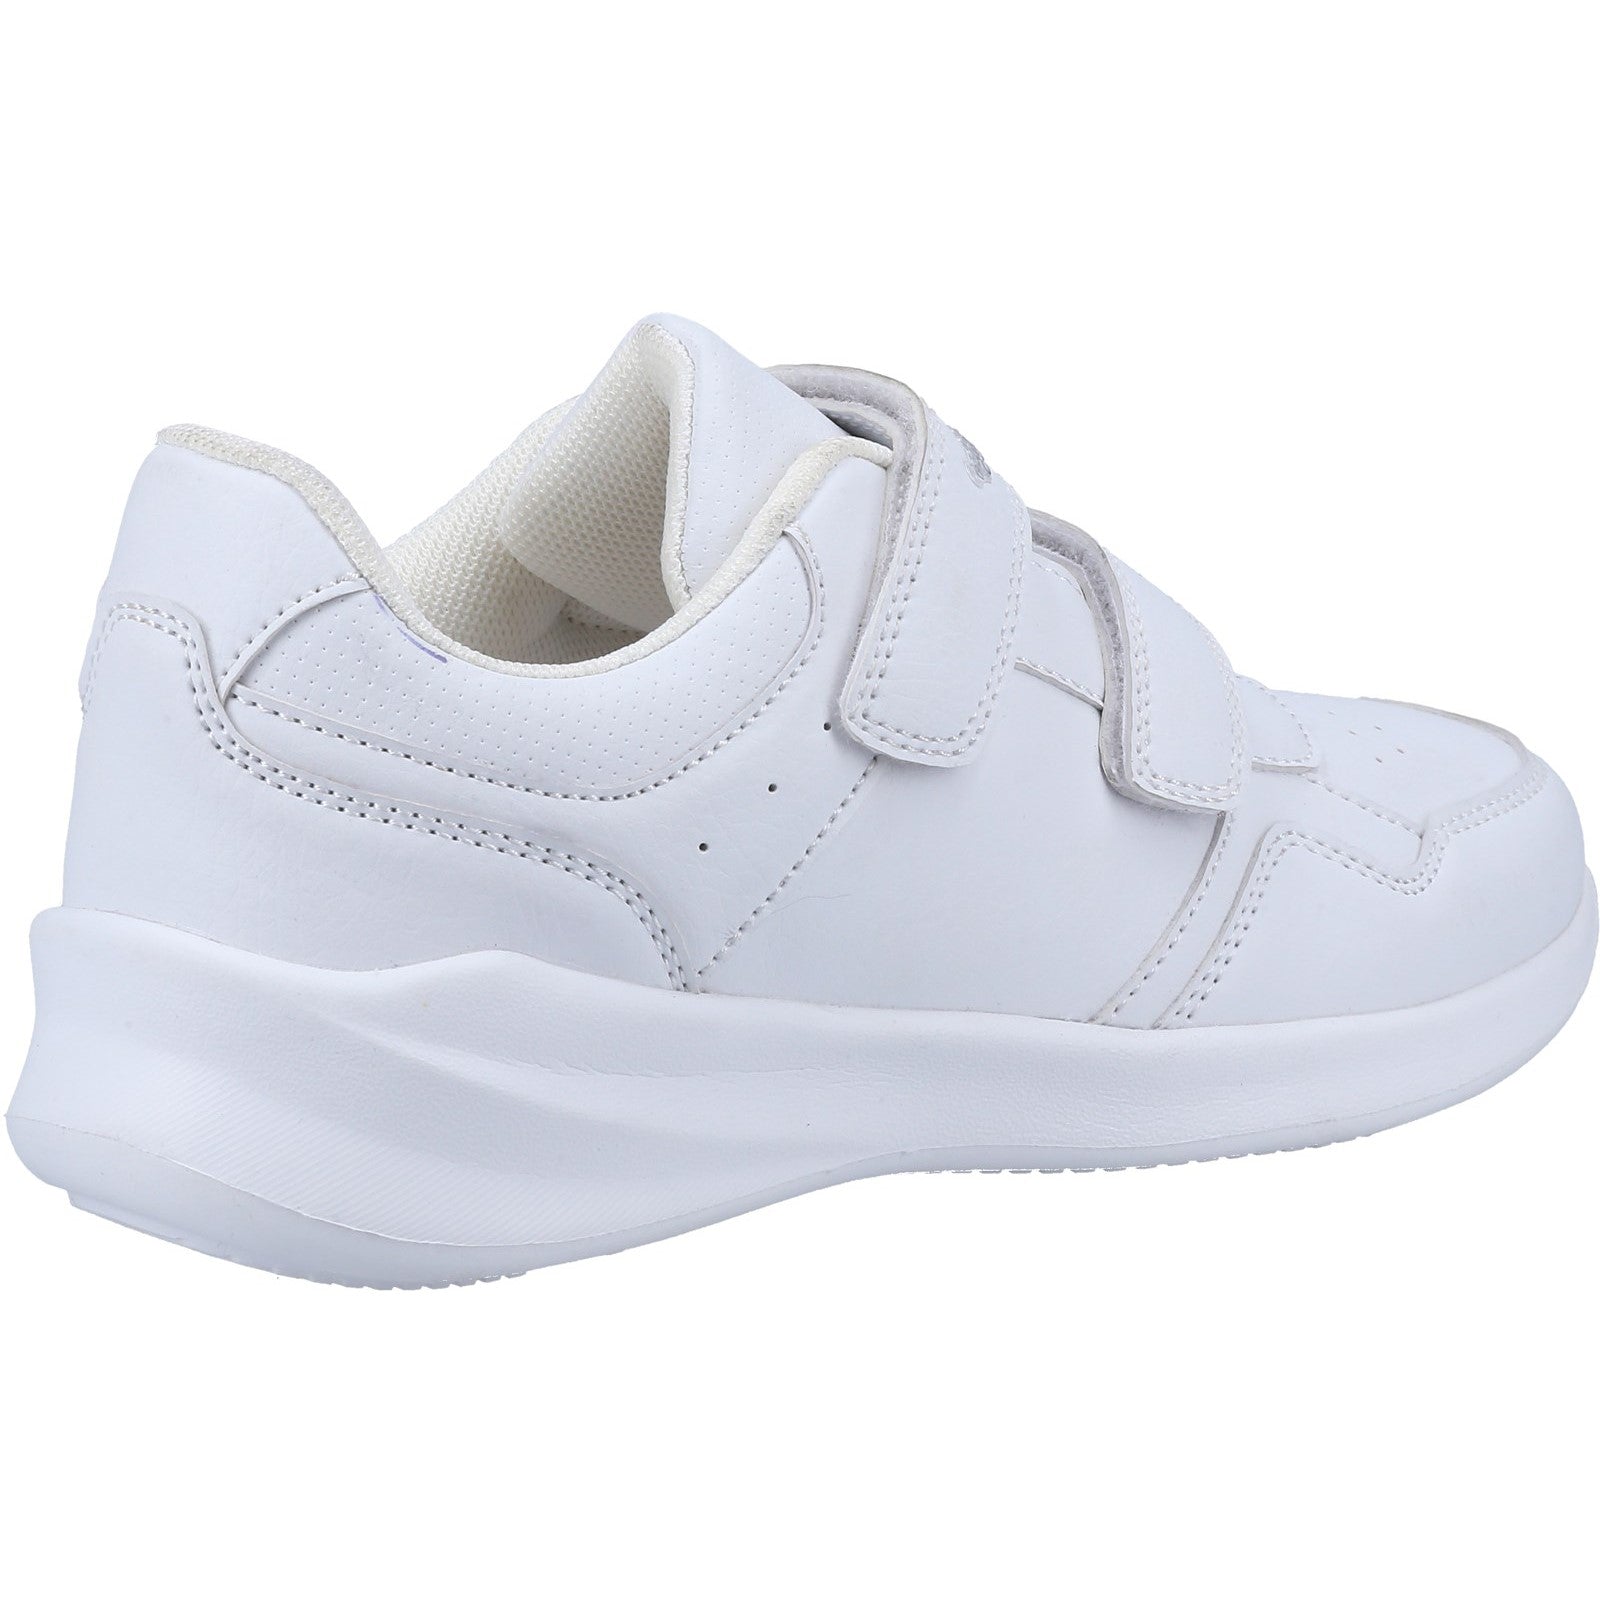 Hush Puppies Kids Marling Leather Trainers - White